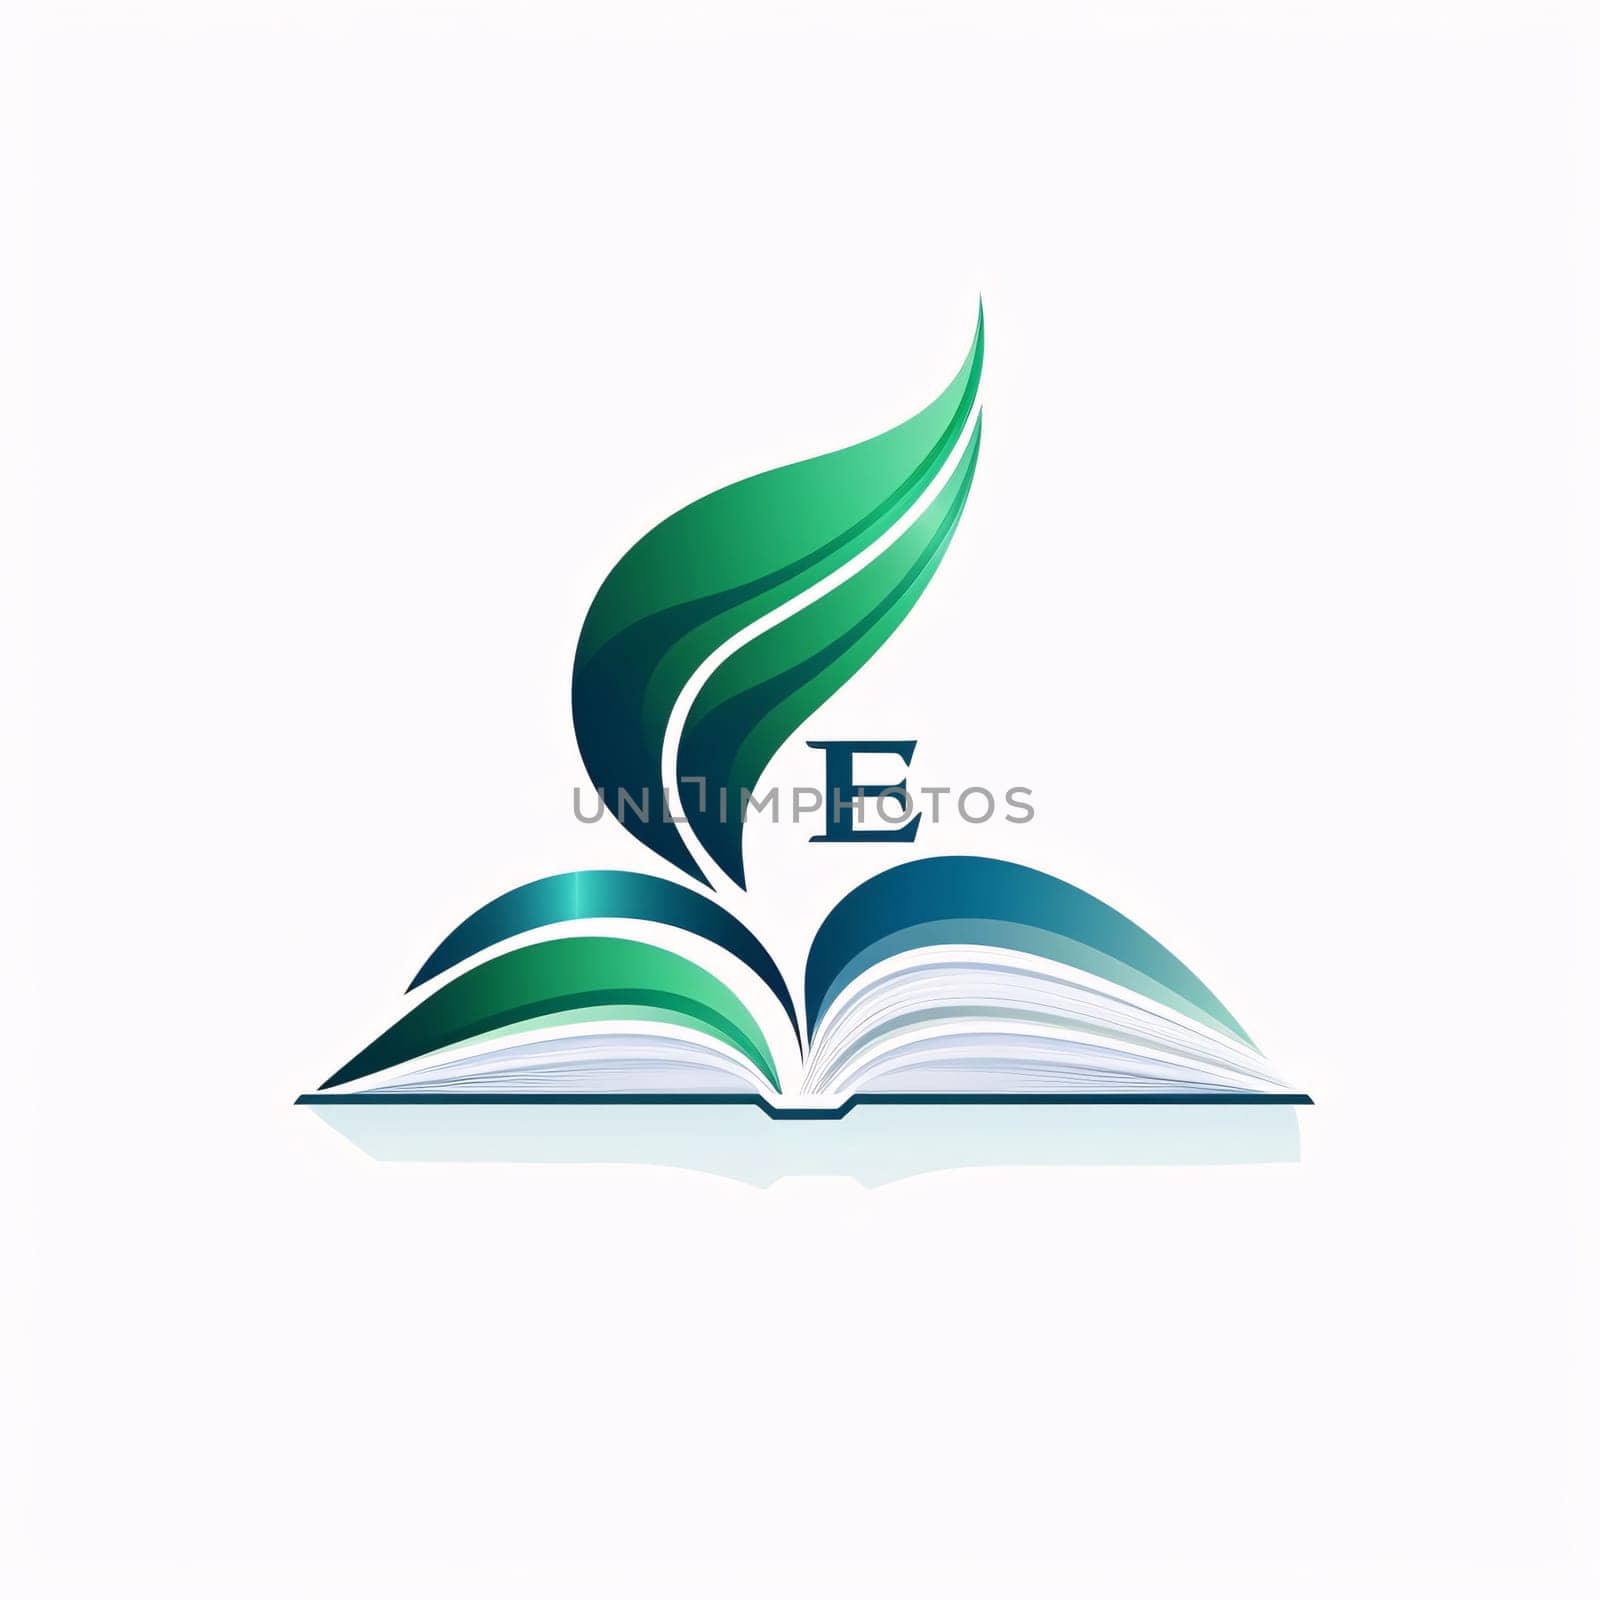 Graphic alphabet letters: Book logo design template. Vector illustration. Book icon with green leaves.